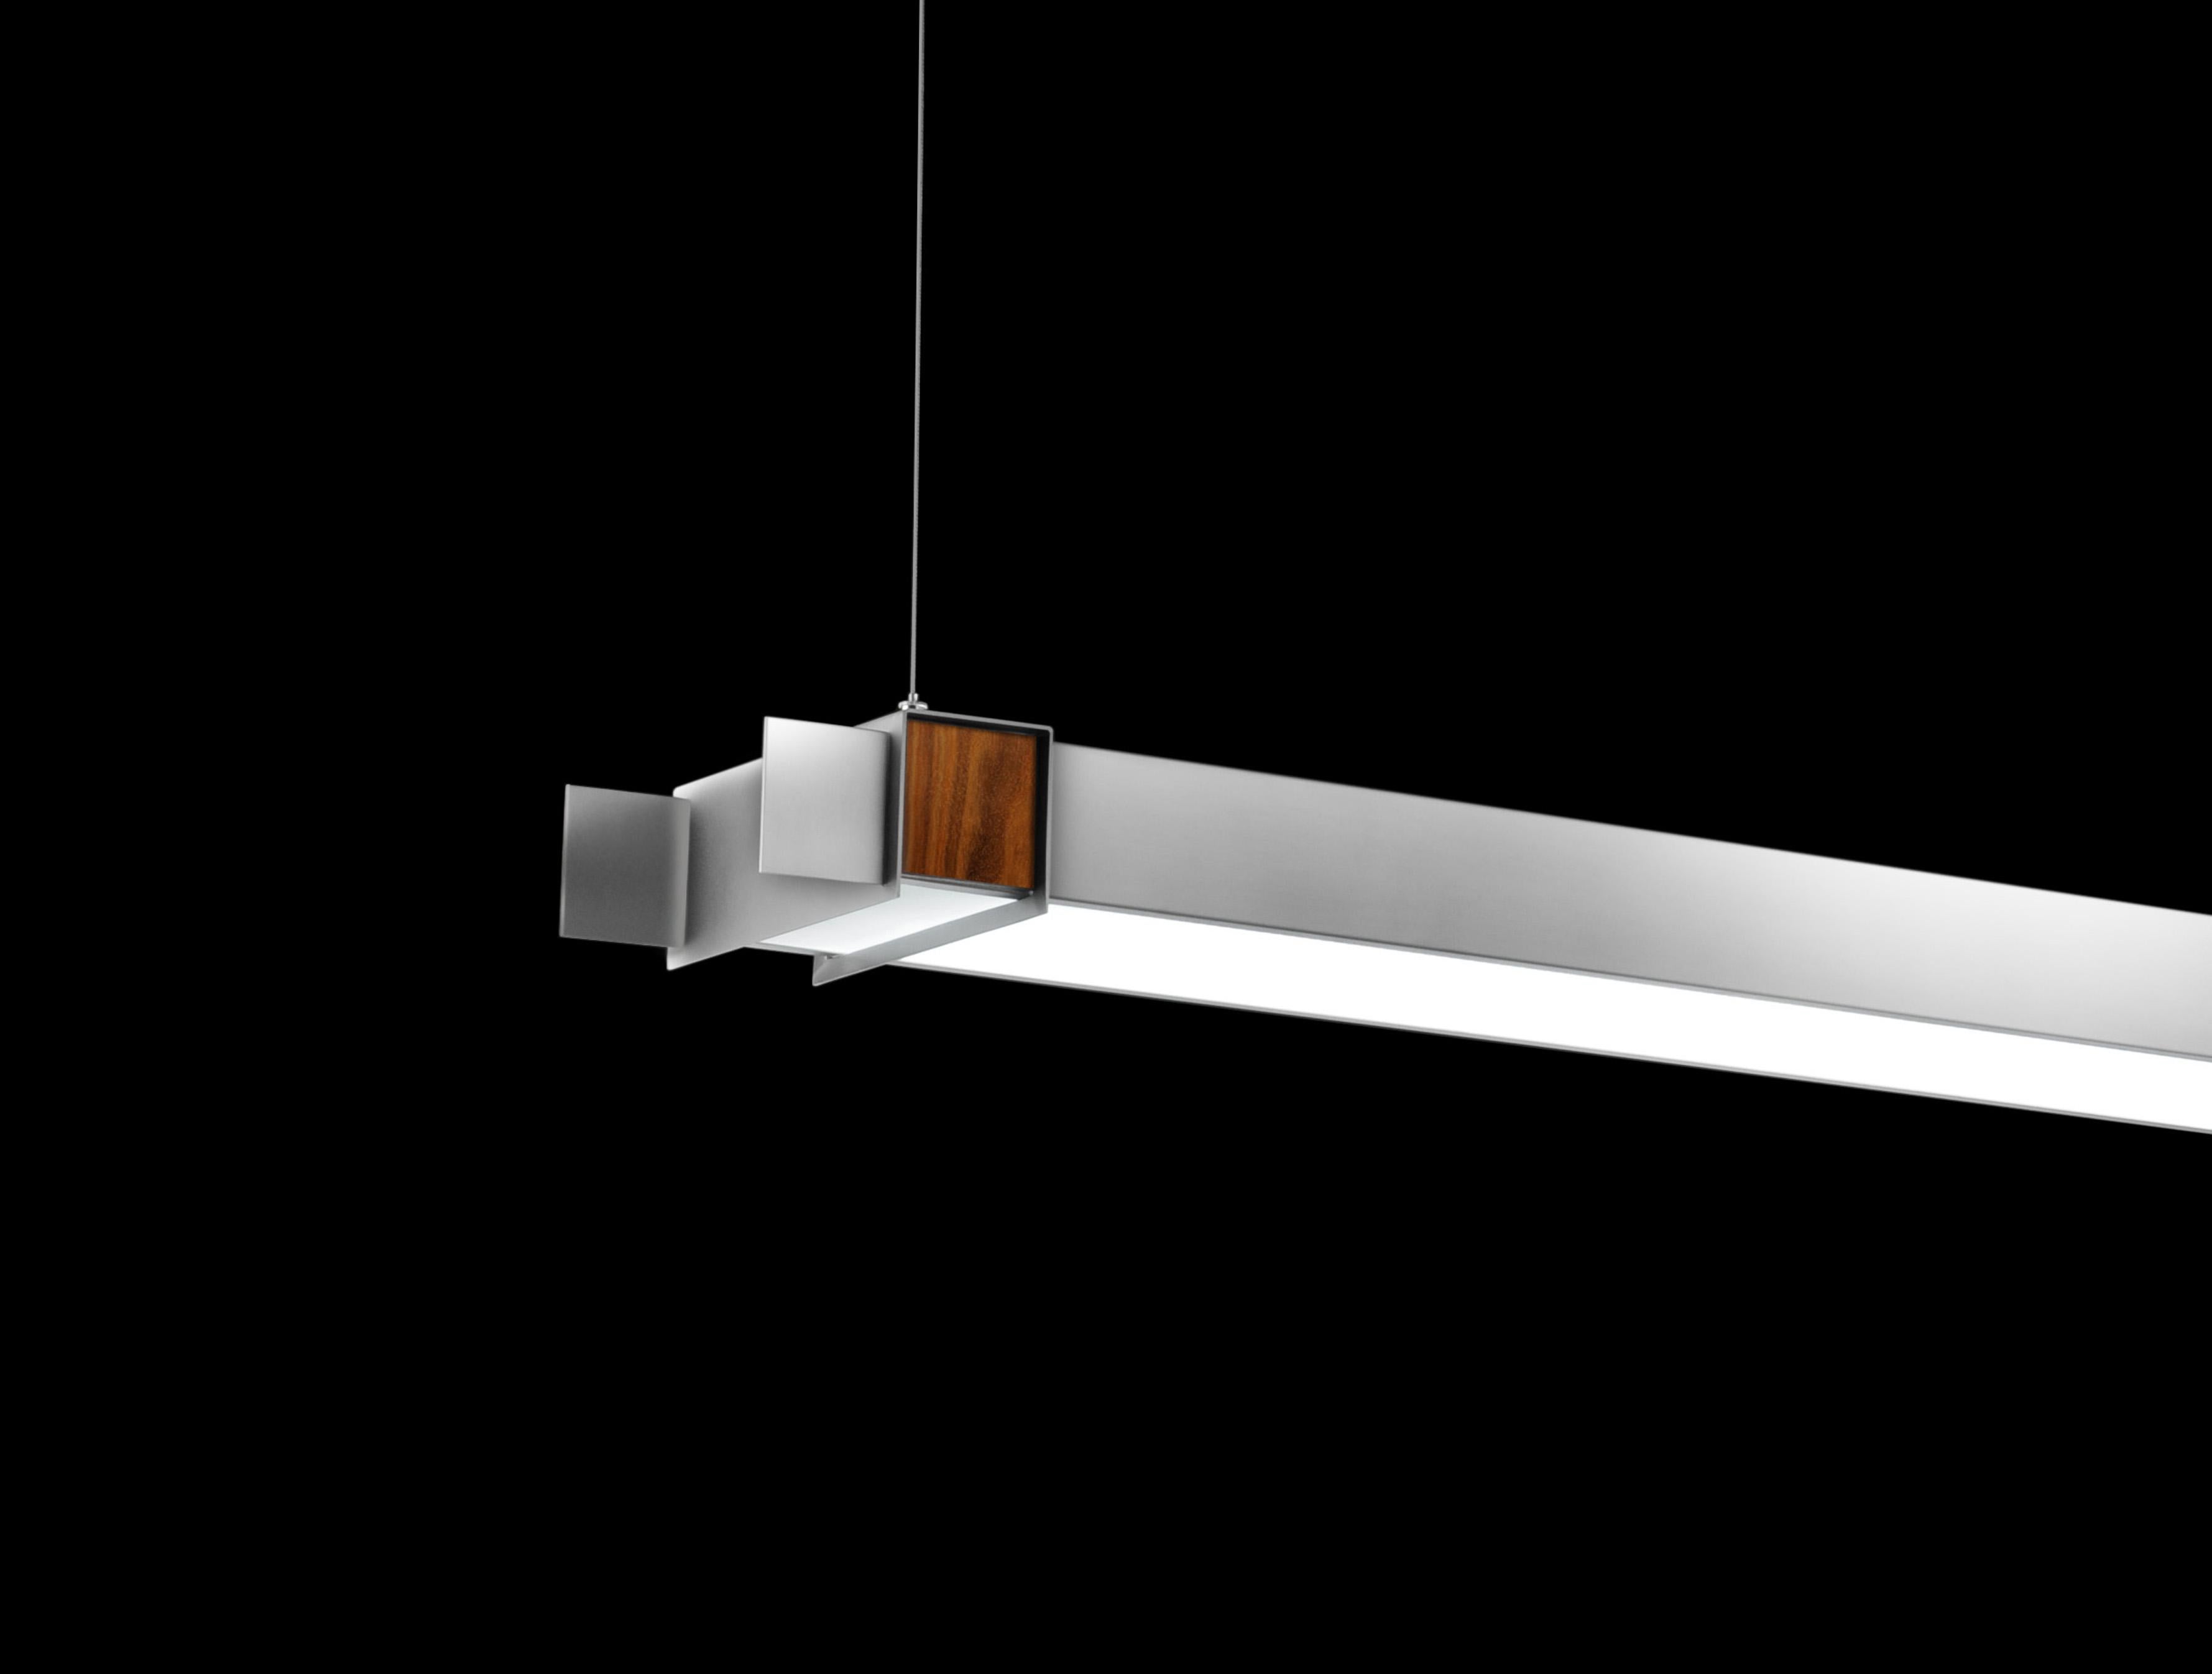 Unique wall-mounted pendant with white glass bottom diffuser in a painted silver steel housing. Inset wood details. In the manner of Mid-Century Modern. LED Lamped, 3000k standard color temperature. Great for use in pairs.

Architect, Sandy